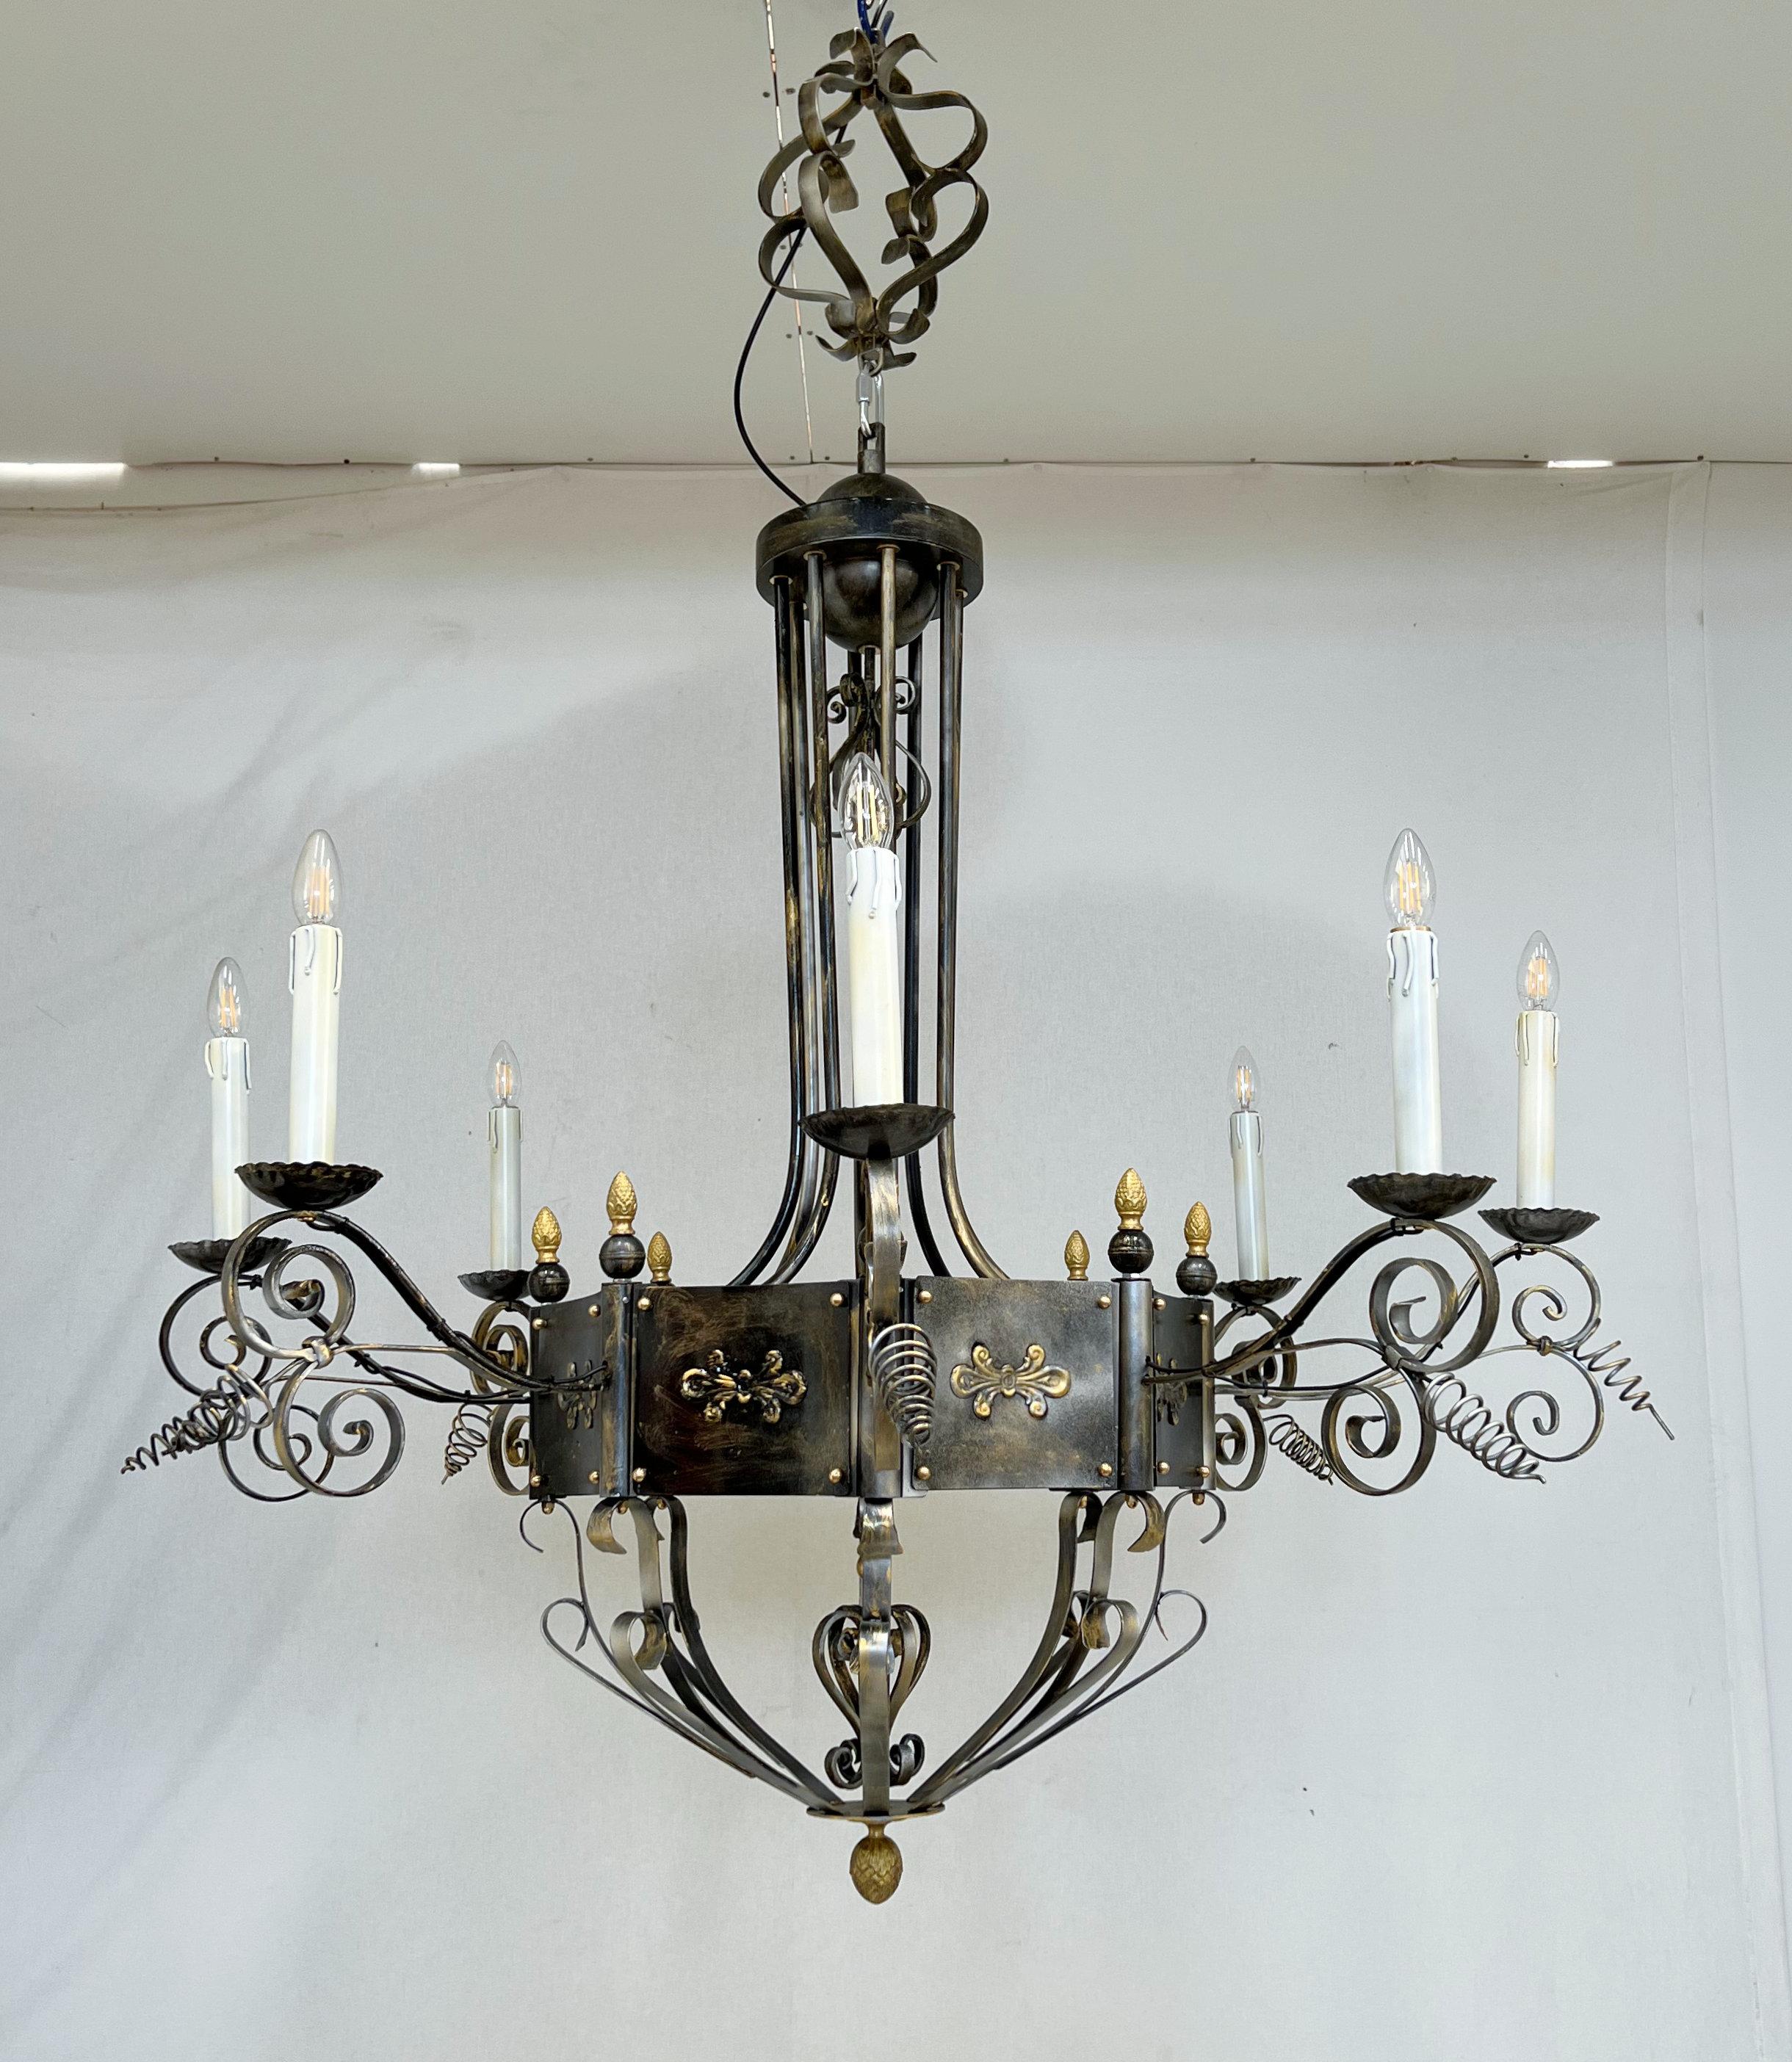 Italian chandelier with lacquered black iron hammered with ornate details painted with silver and gold / Designed by Fabio Bergomi for Fabio Ltd / Made in Italy
8 lights / E12 or E14 type / max 40W each
Measures: Diameter 55 inches / Height 59